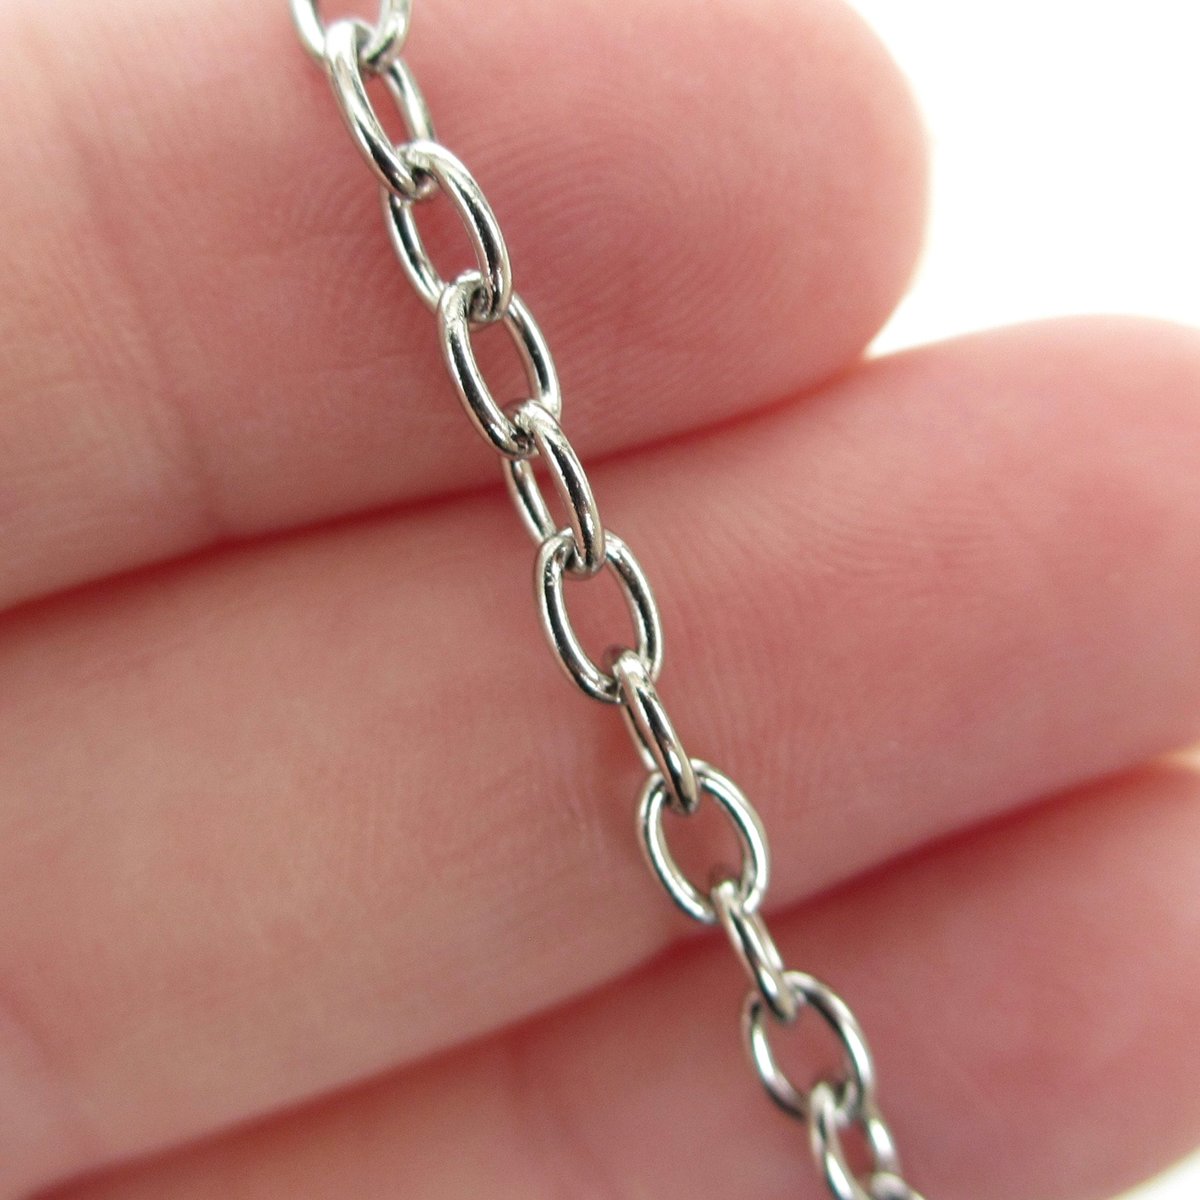 Stainless steel 3mm cable chain anklet, bracelet, or necklace- choose your length